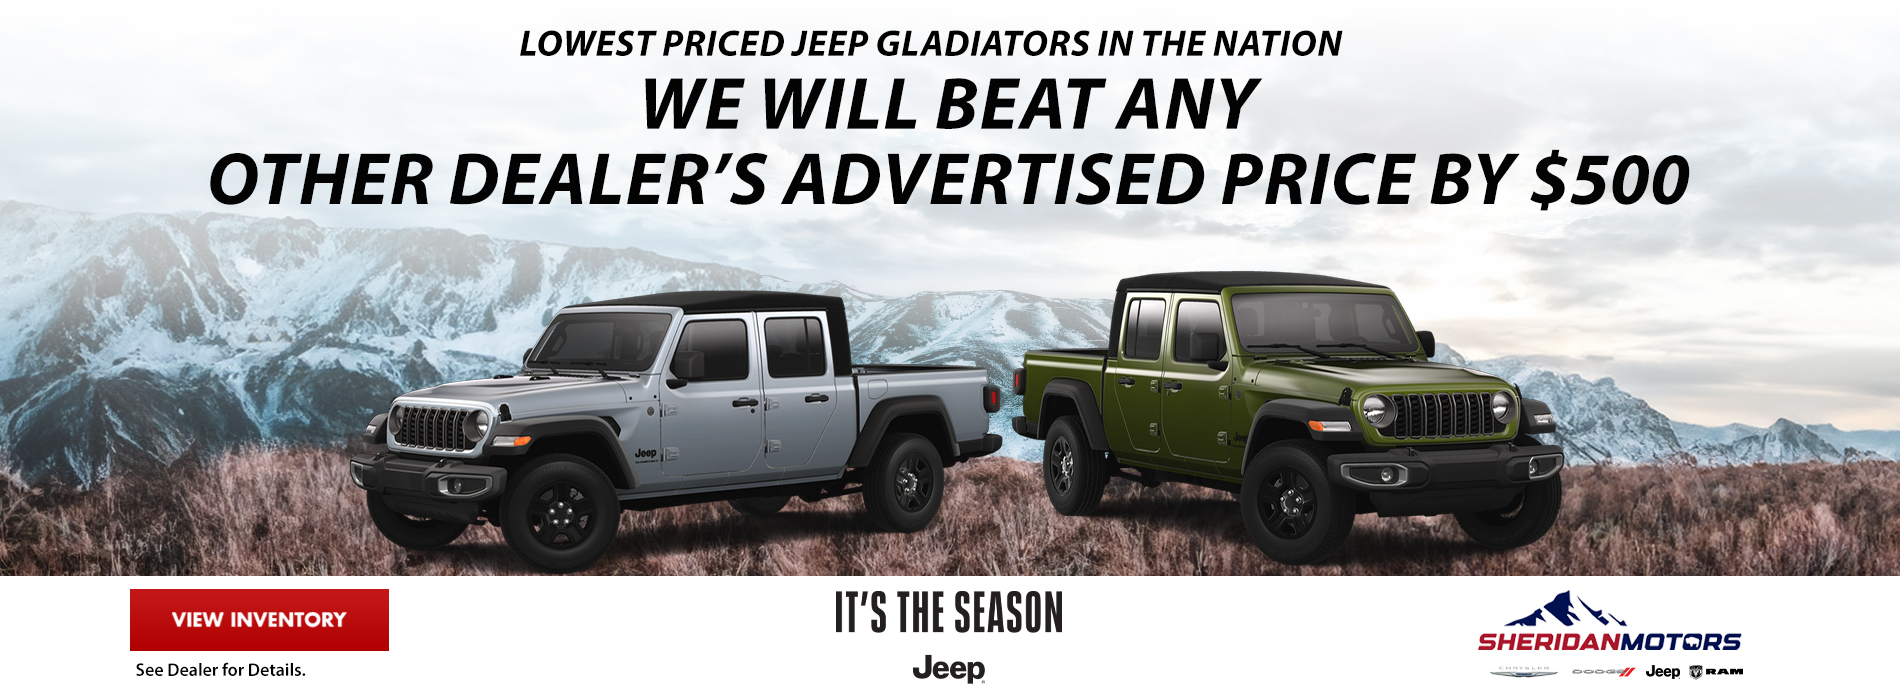 LOWEST PRICED JEEP GLADIATORS IN THE NATION